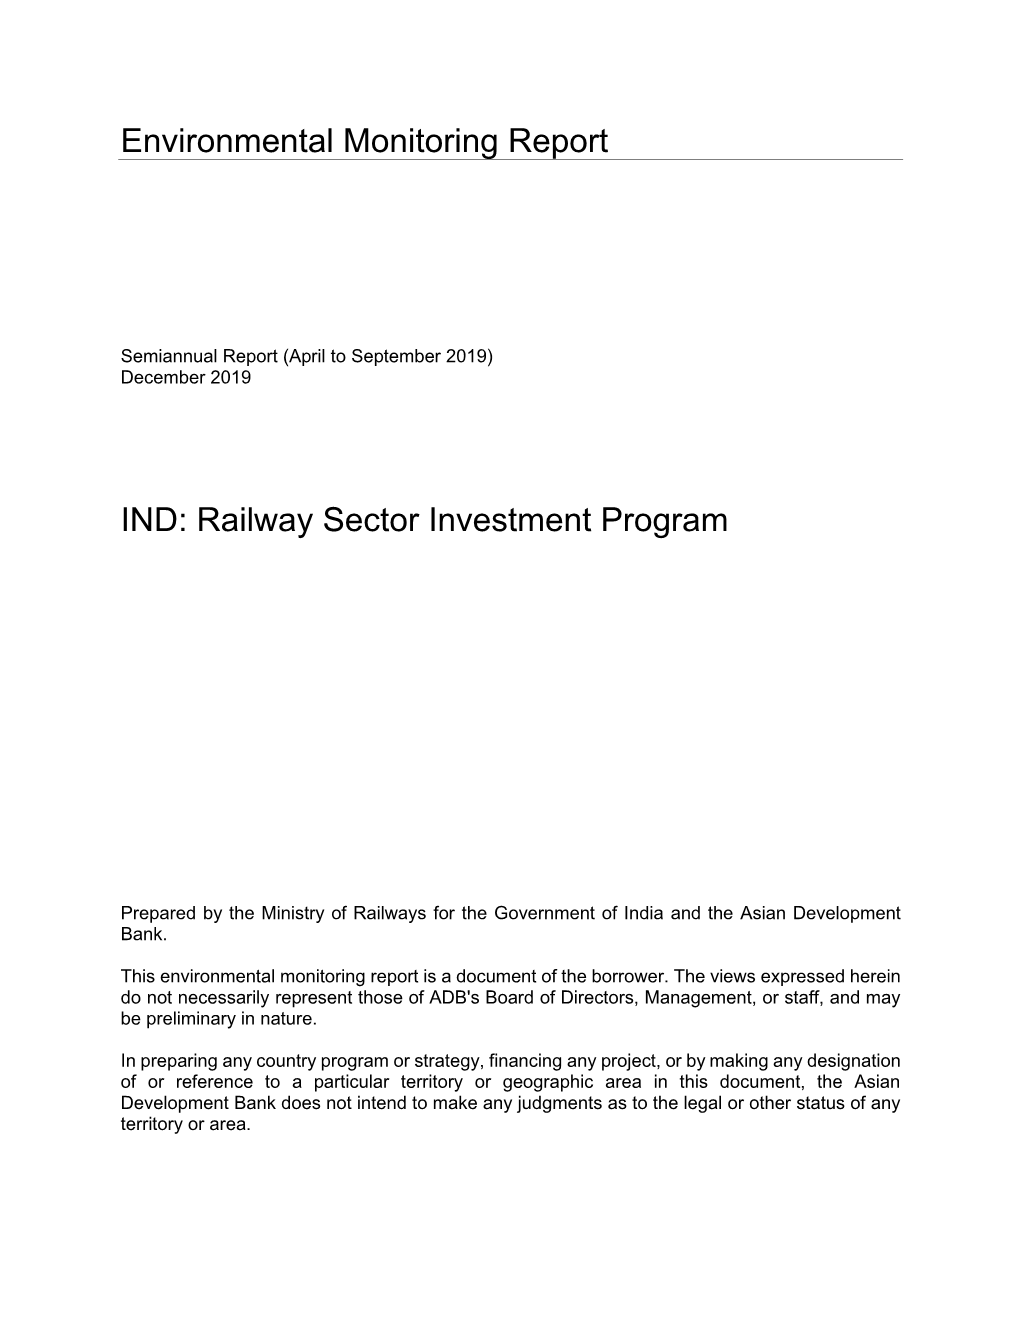 Environmental Monitoring Report IND: Railway Sector Investment